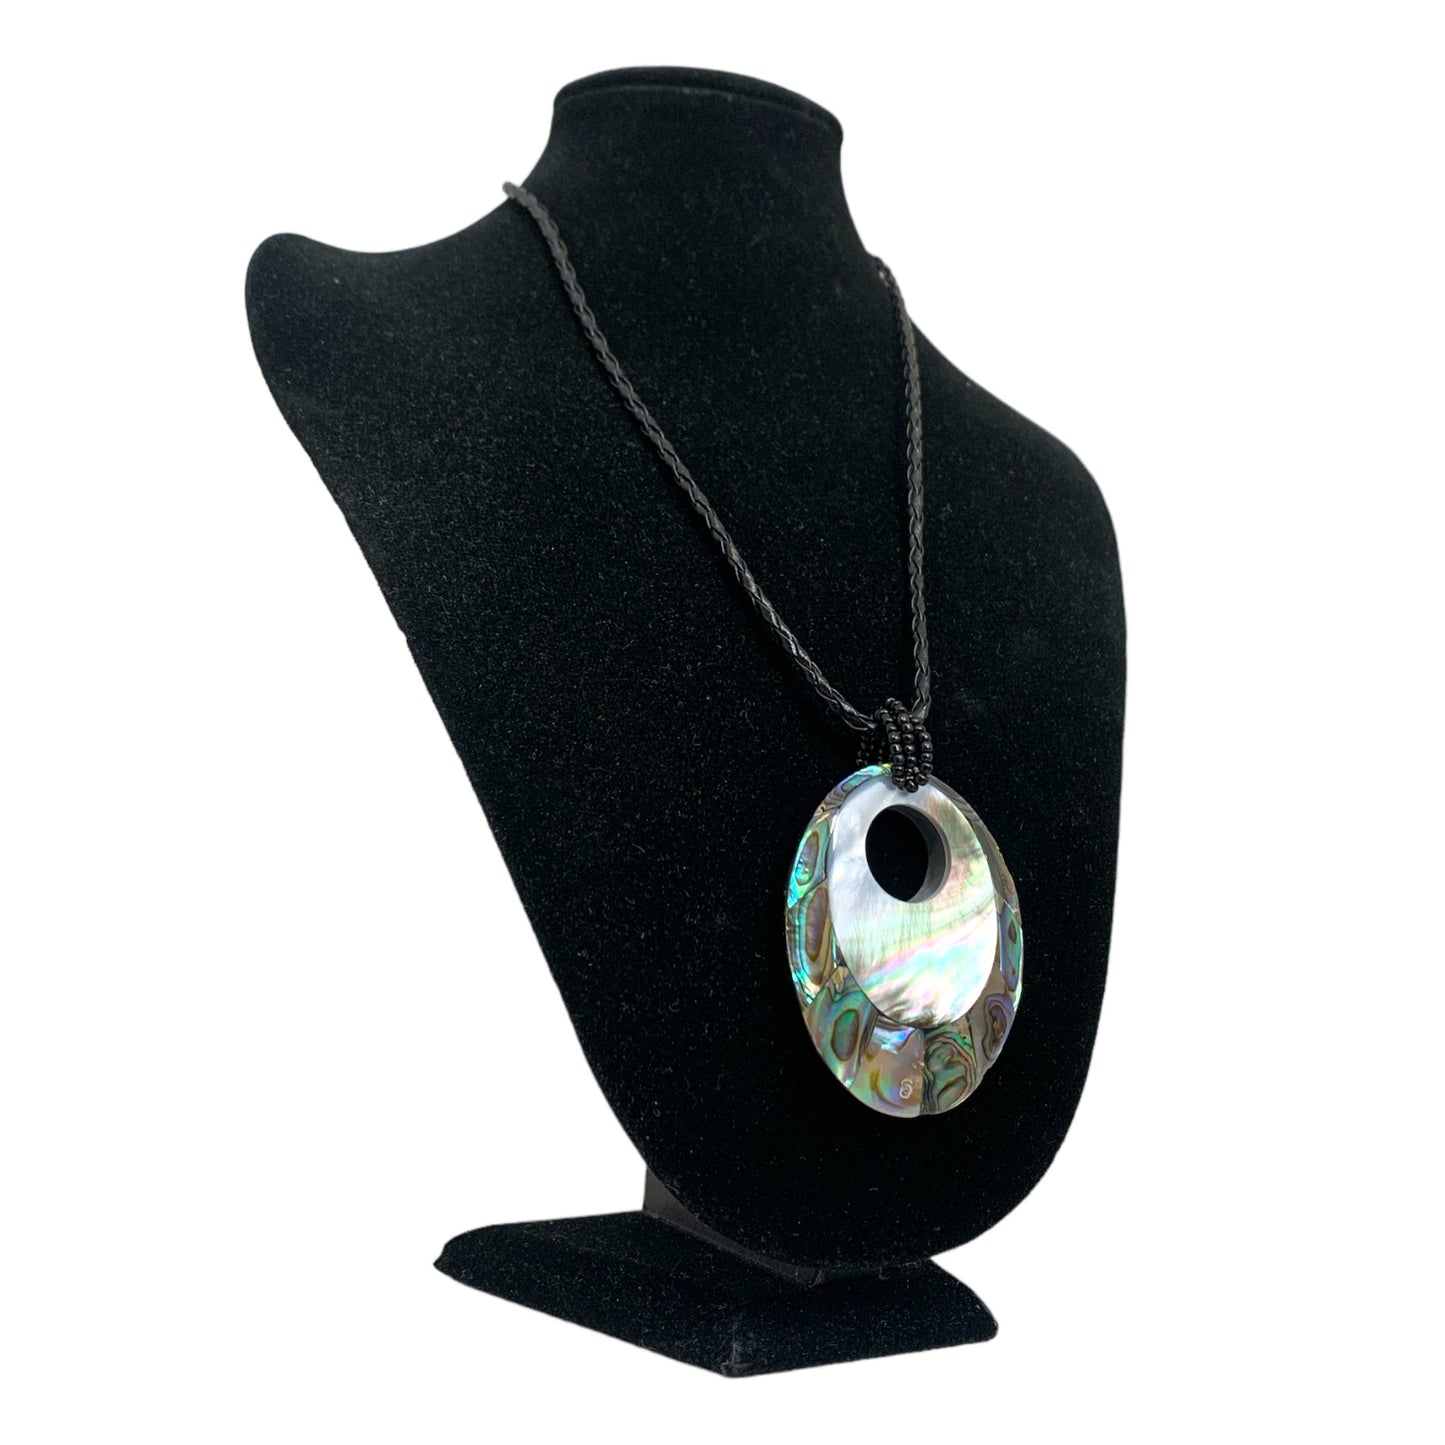 Abalone and MOP Shell Oval Pendant with Twisted Leather Necklace and Hole